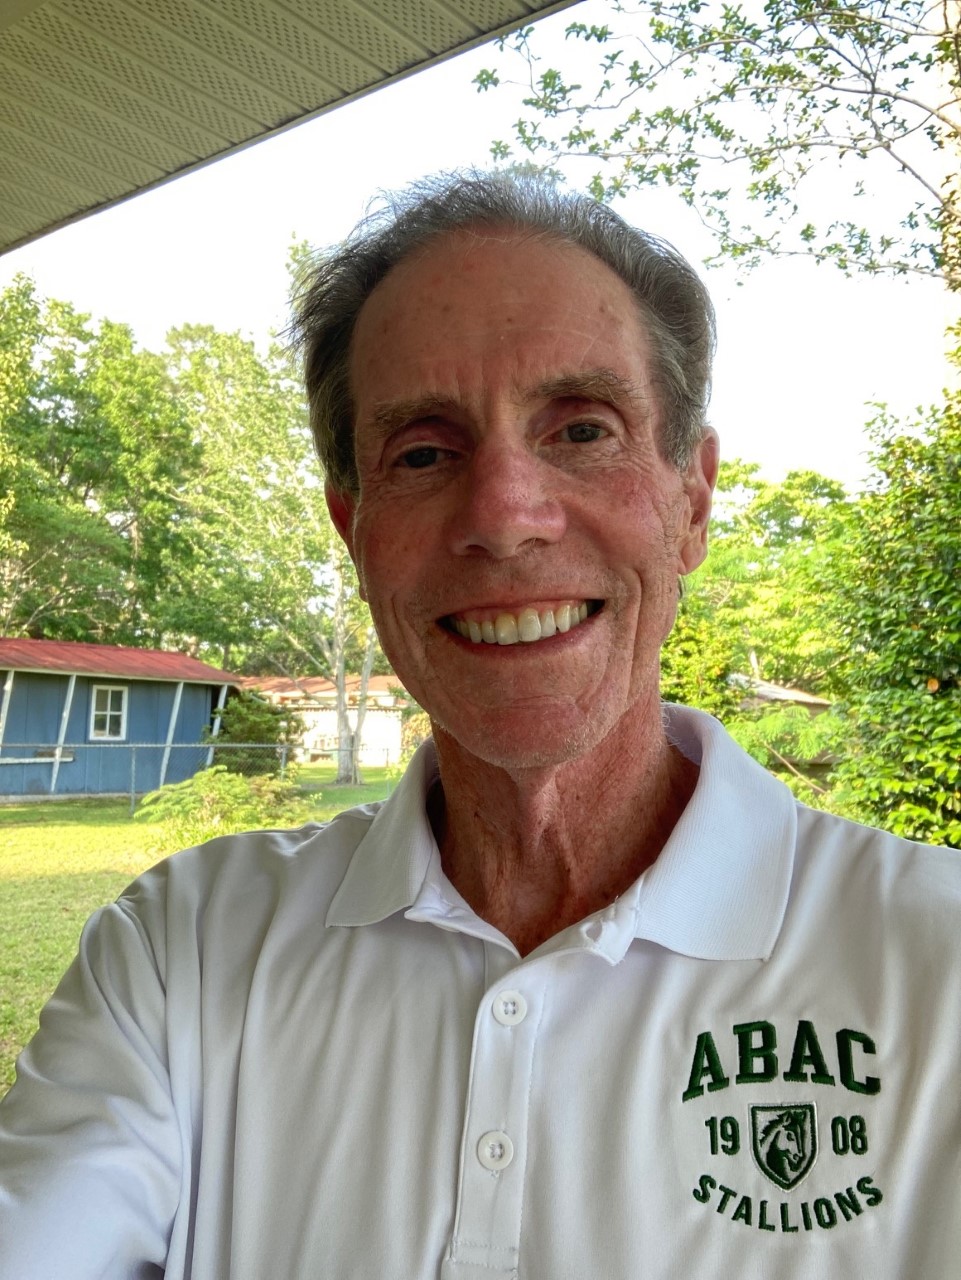 ABAC Adds Cross-Country to Intercollegiate Sports Lineup